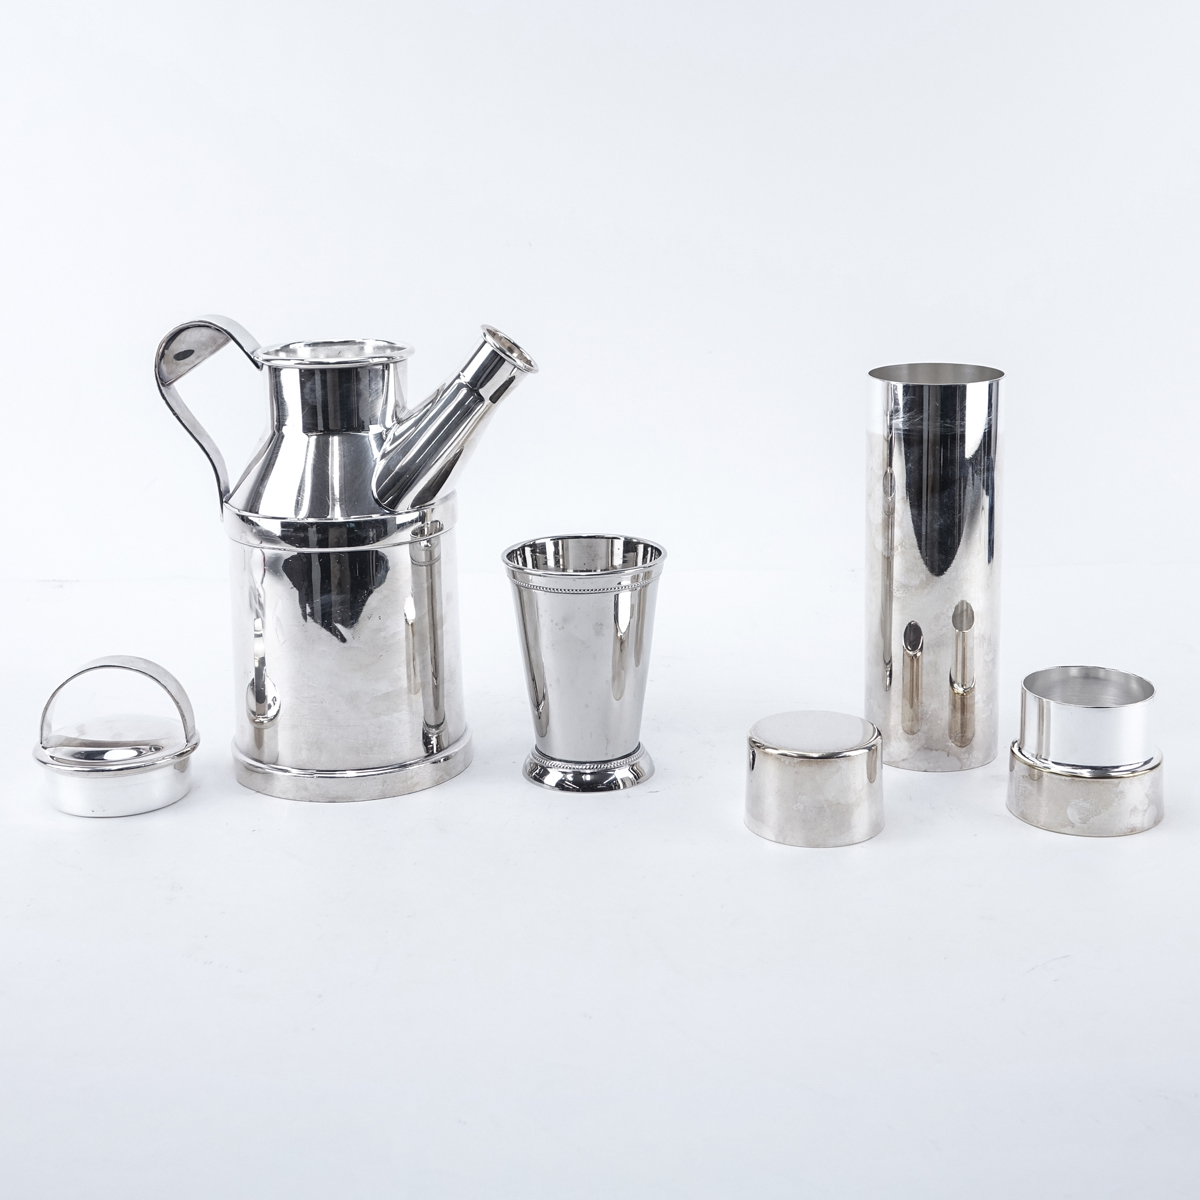 Grouping Of Silver Plate Bar Accessories. Includes: Reed & Barton shaker/decanter, Towle shaker, Towle tumbler, 6 golf club motif stirrers, 6 decanter labels.